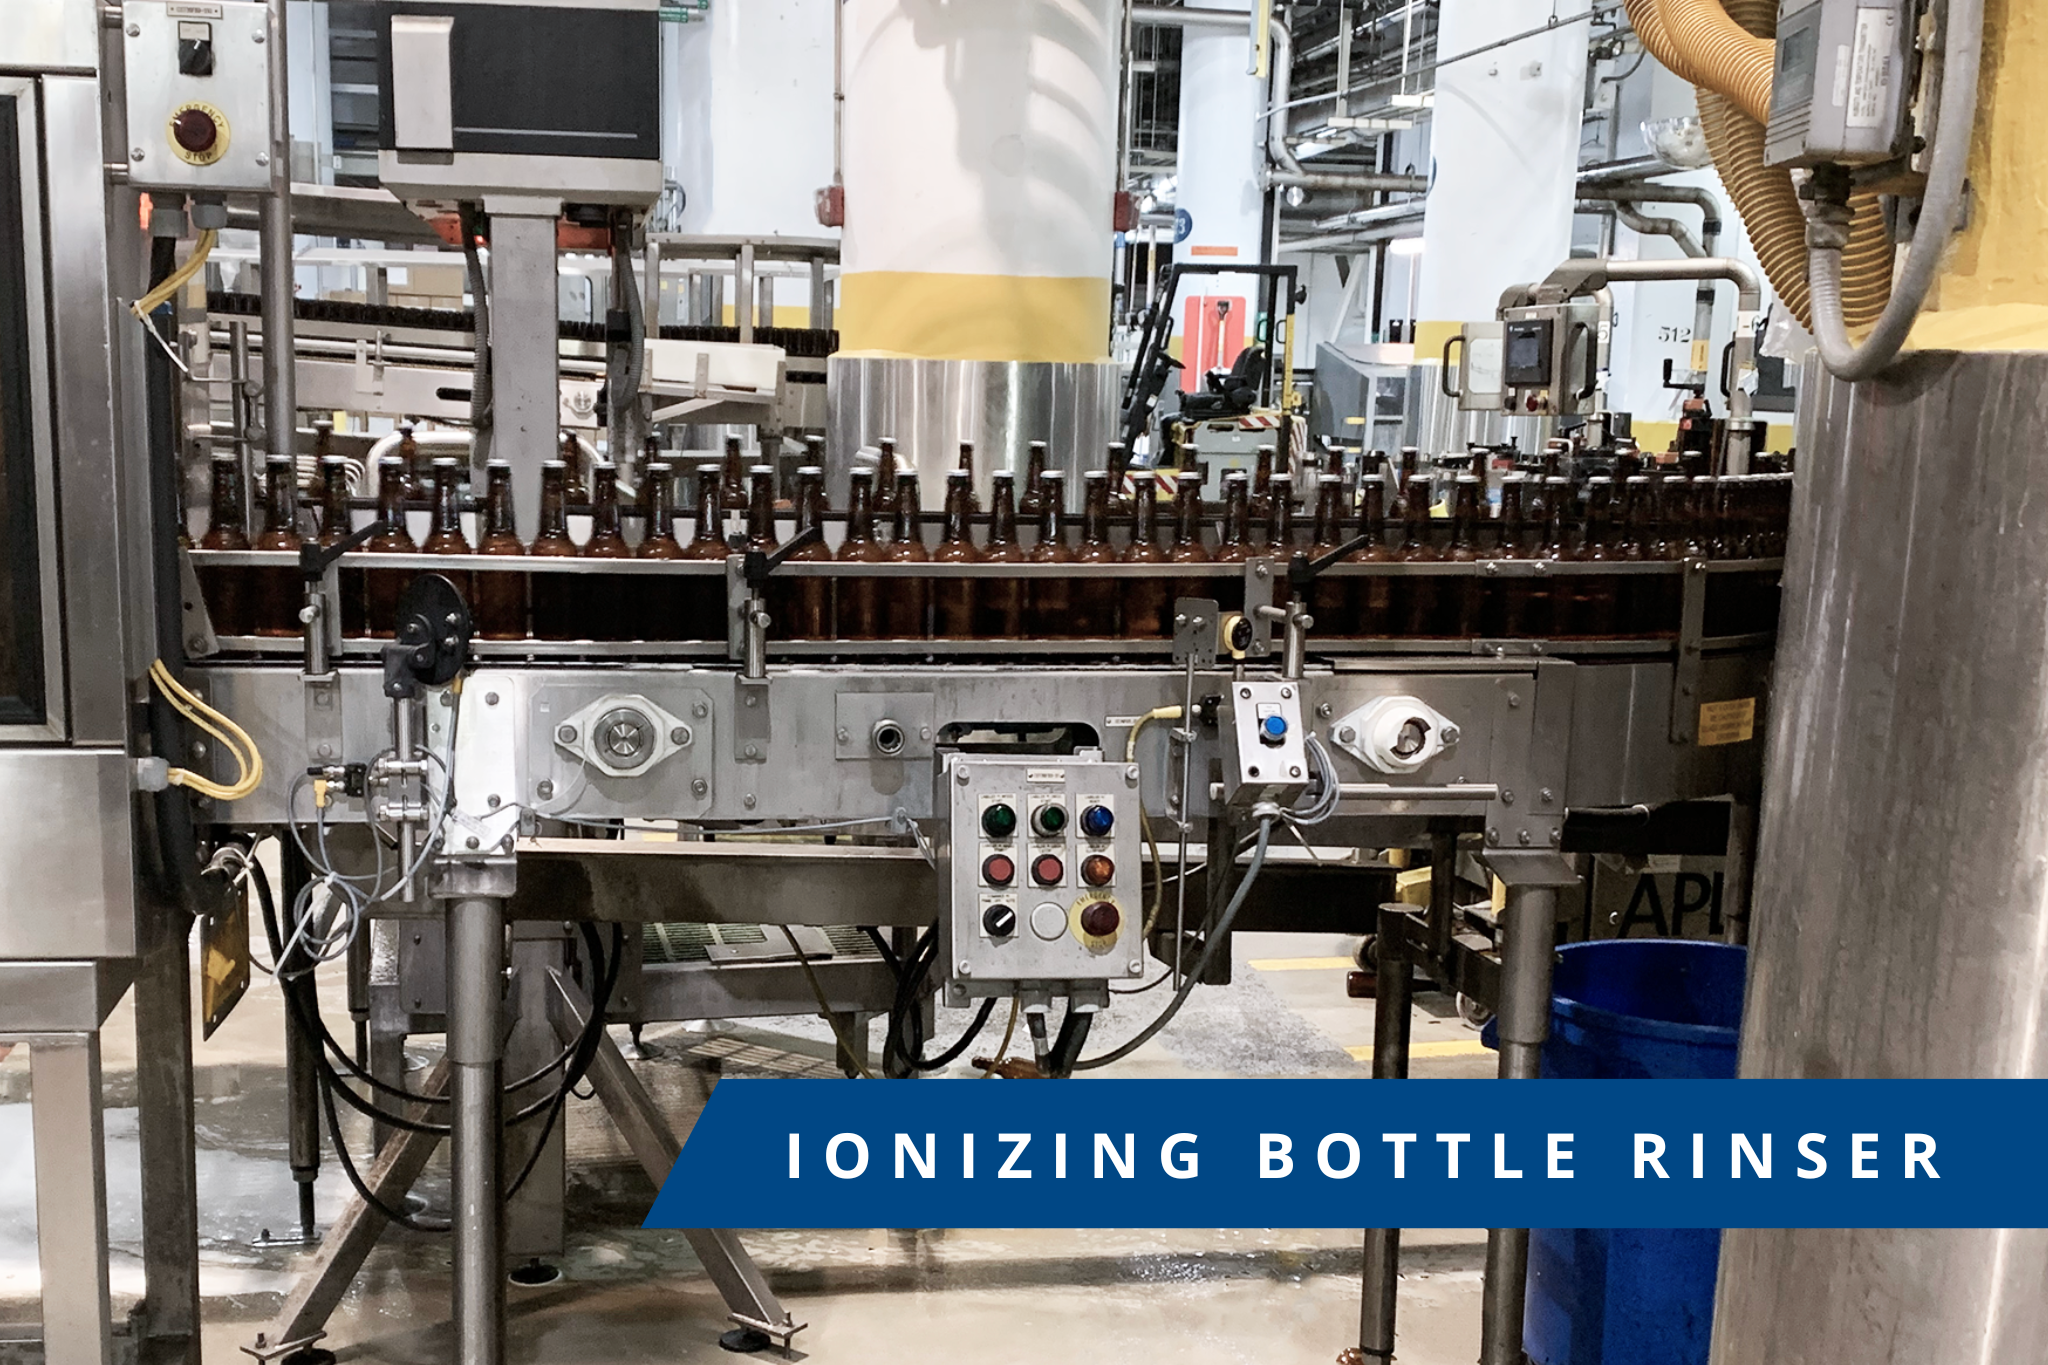 Case Study: Custom Crafting An Ionized Air Solution For Beer Bottles